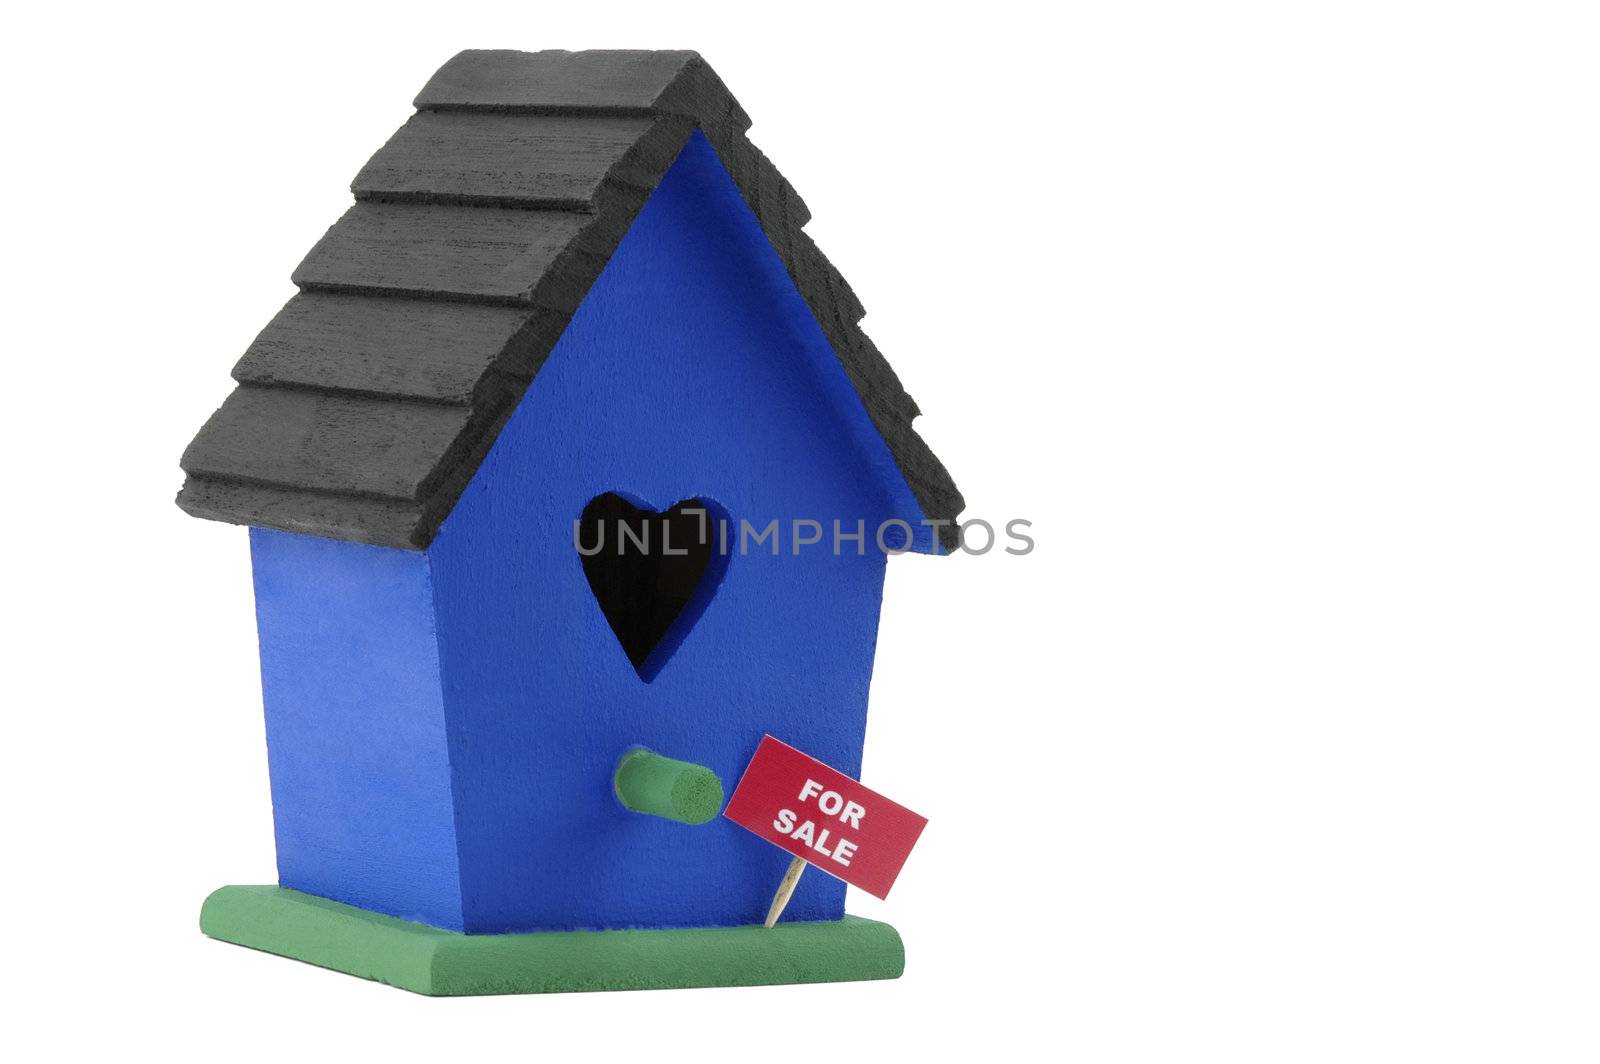 Birdhouse with a for sale sign on a white background,